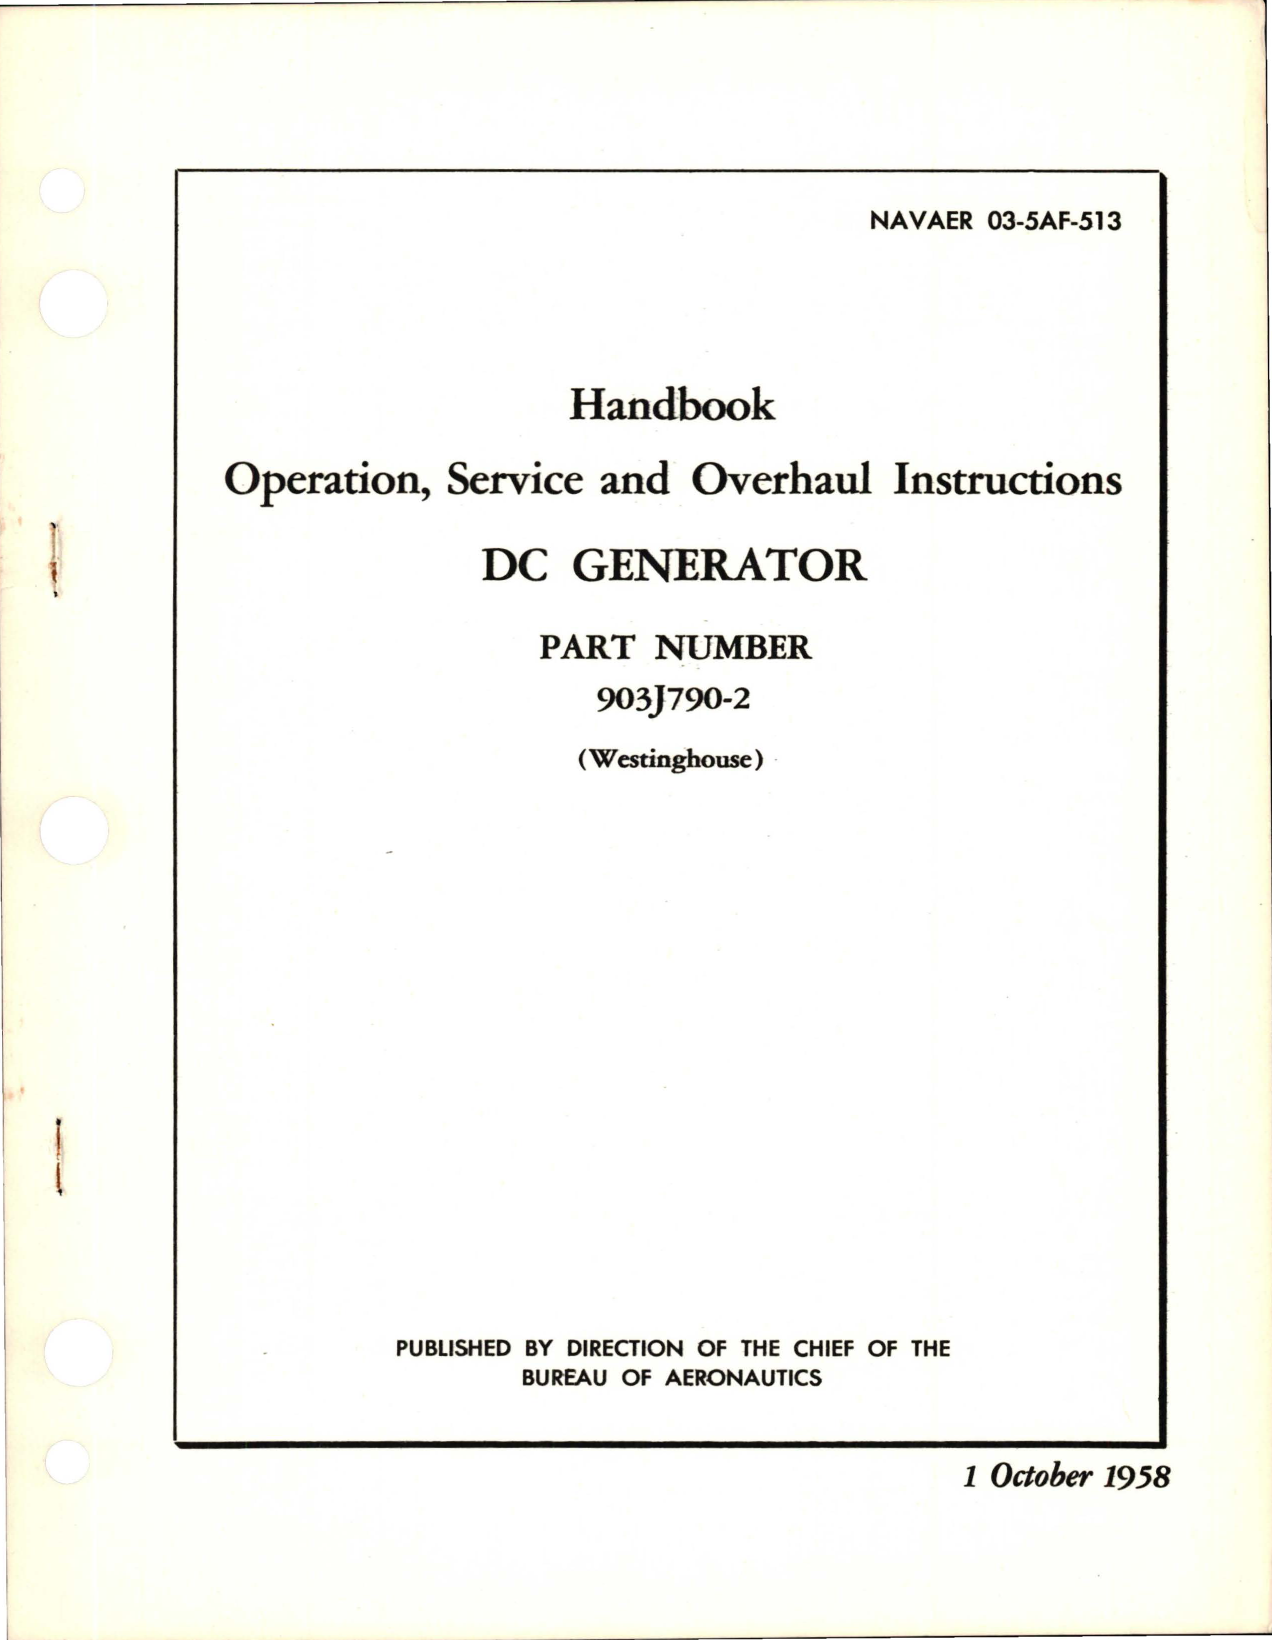 Sample page 1 from AirCorps Library document: Operation, Service and Overhaul Instructions for DC Generator - Part 903J790-2 